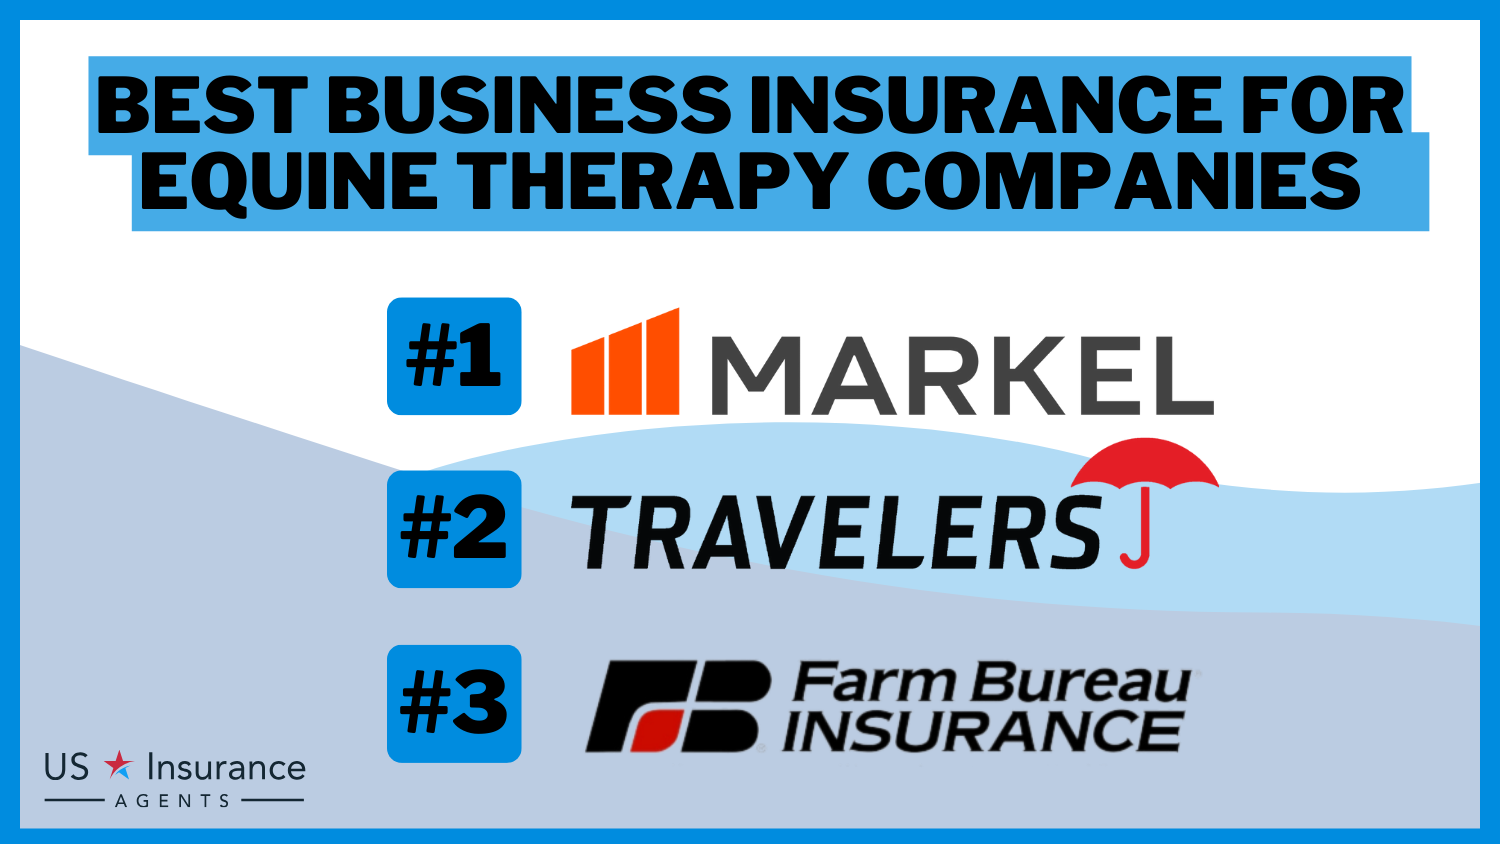 3 Best Business Insurance for Equine Therapy Companies: Markel, Travelers and Farm Bureau.